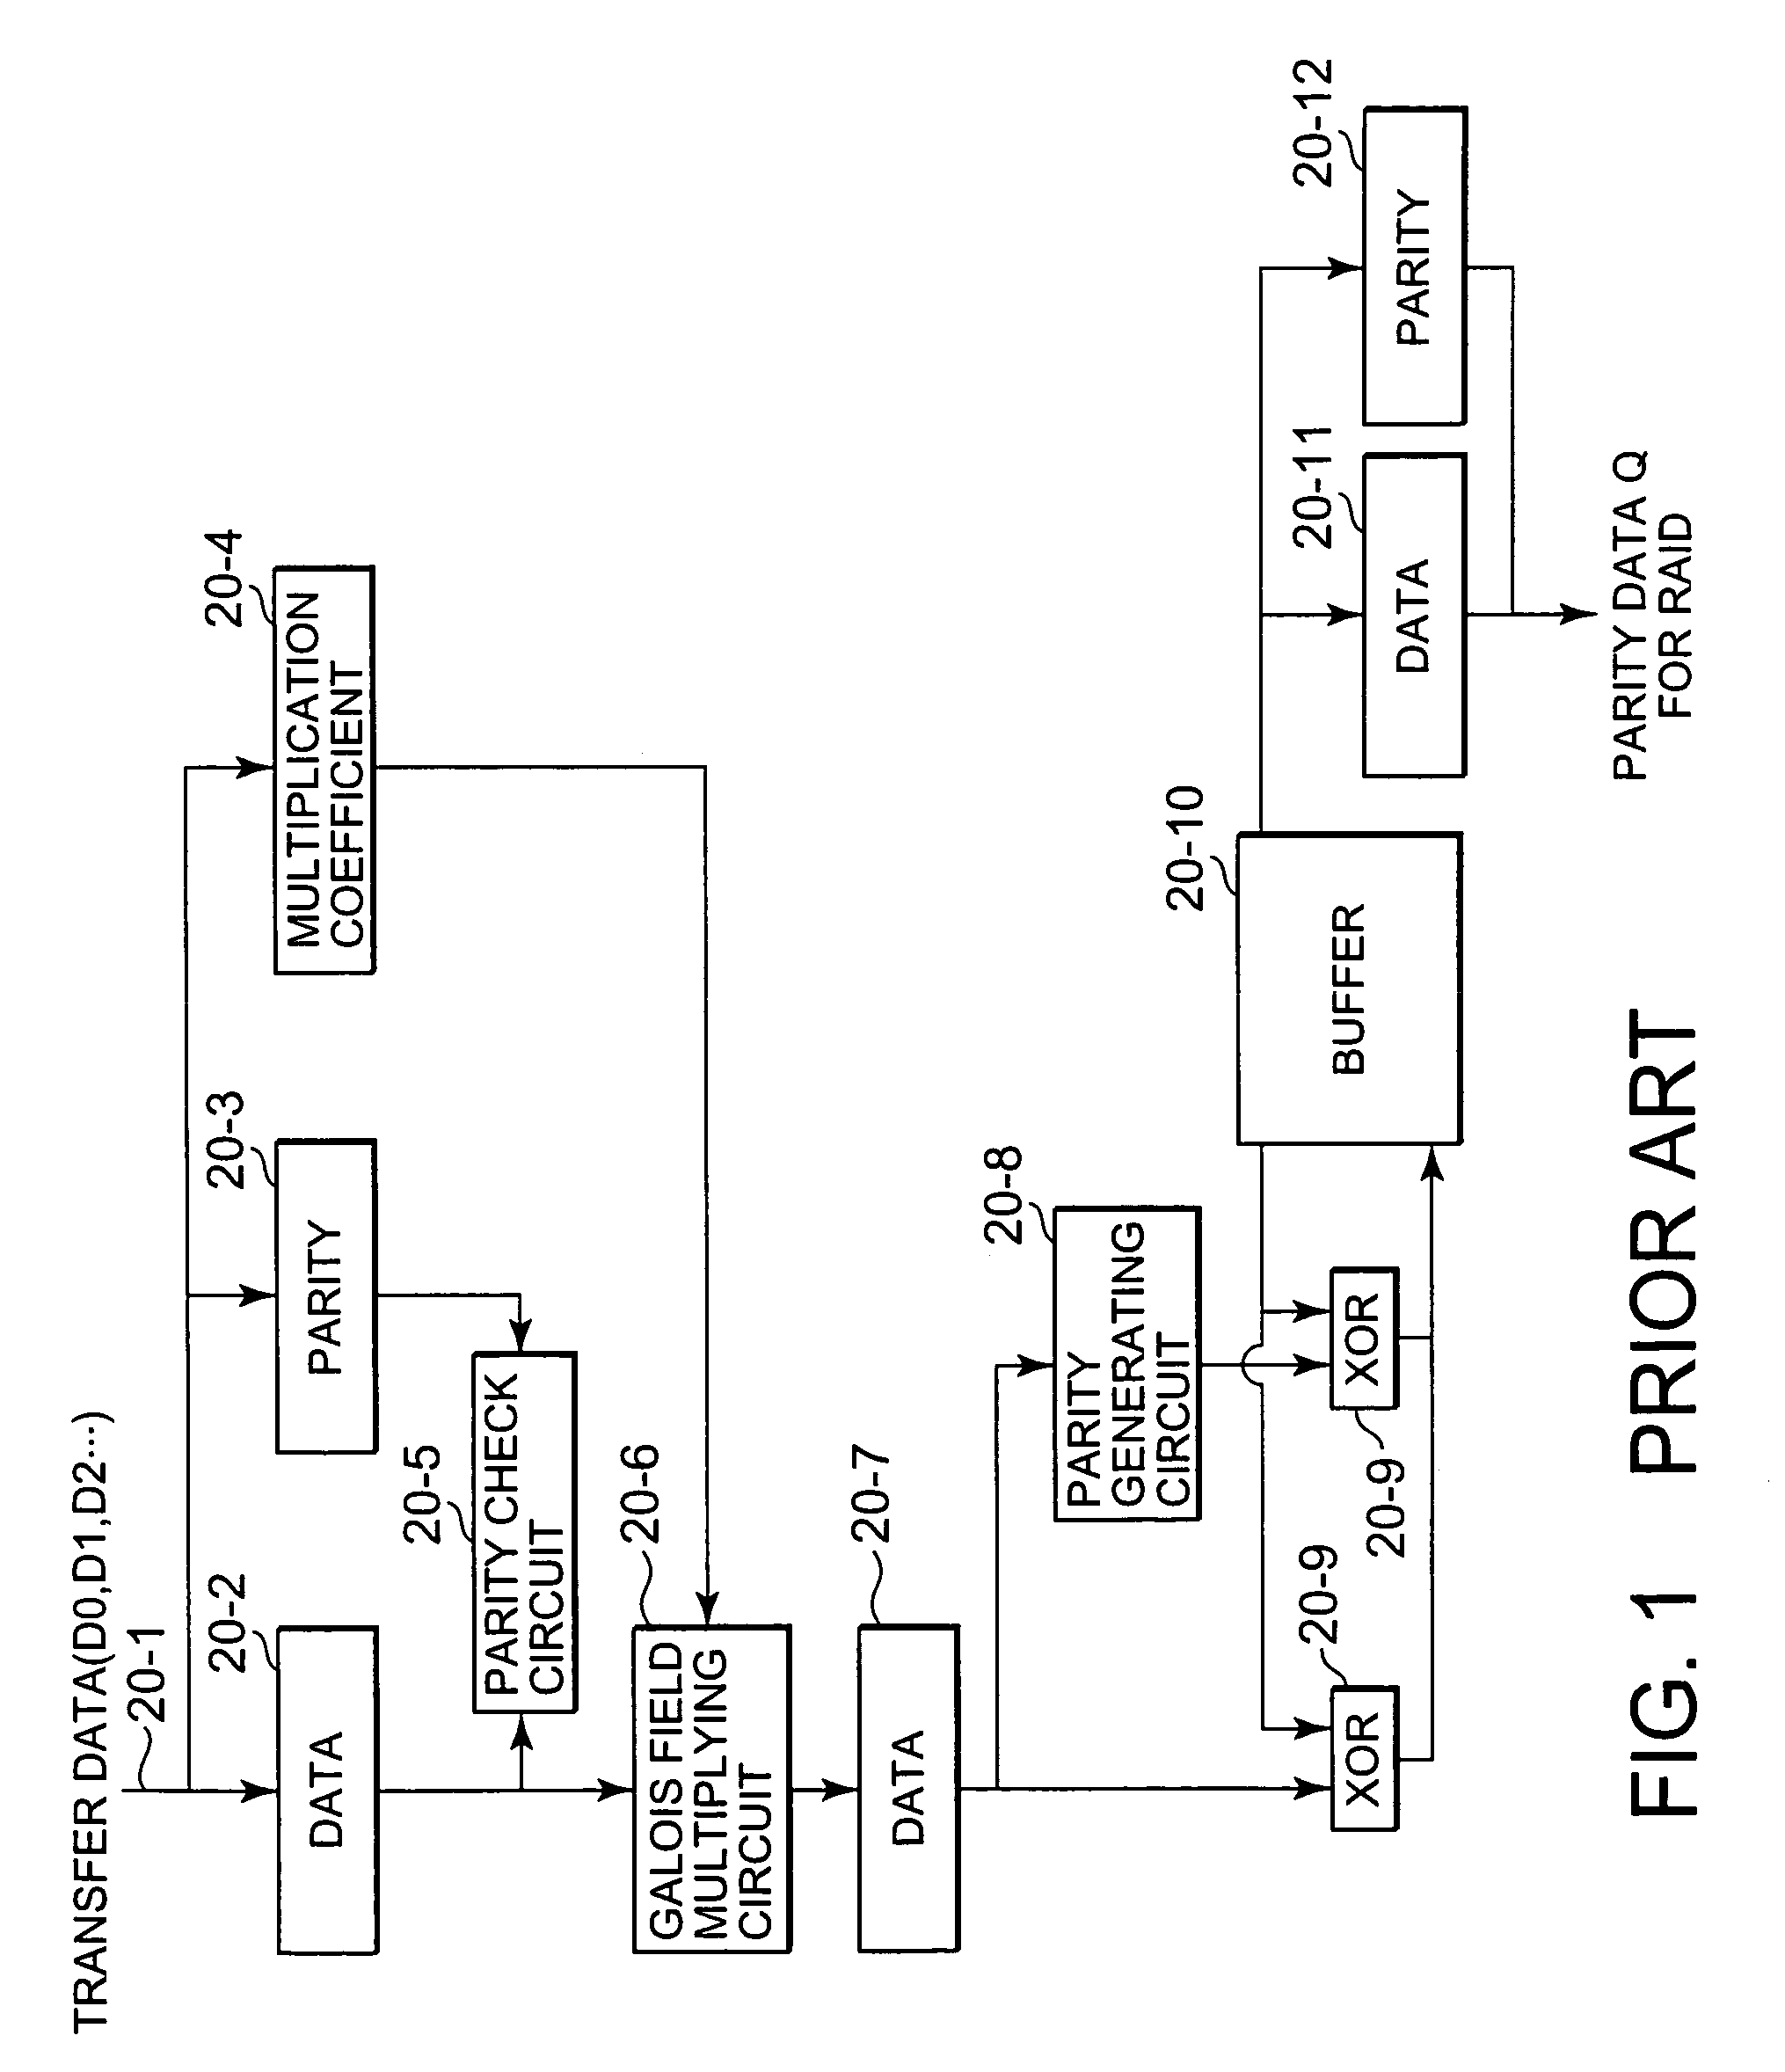 Disk array device, parity data generating circuit for RAID and Galois field multiplying circuit